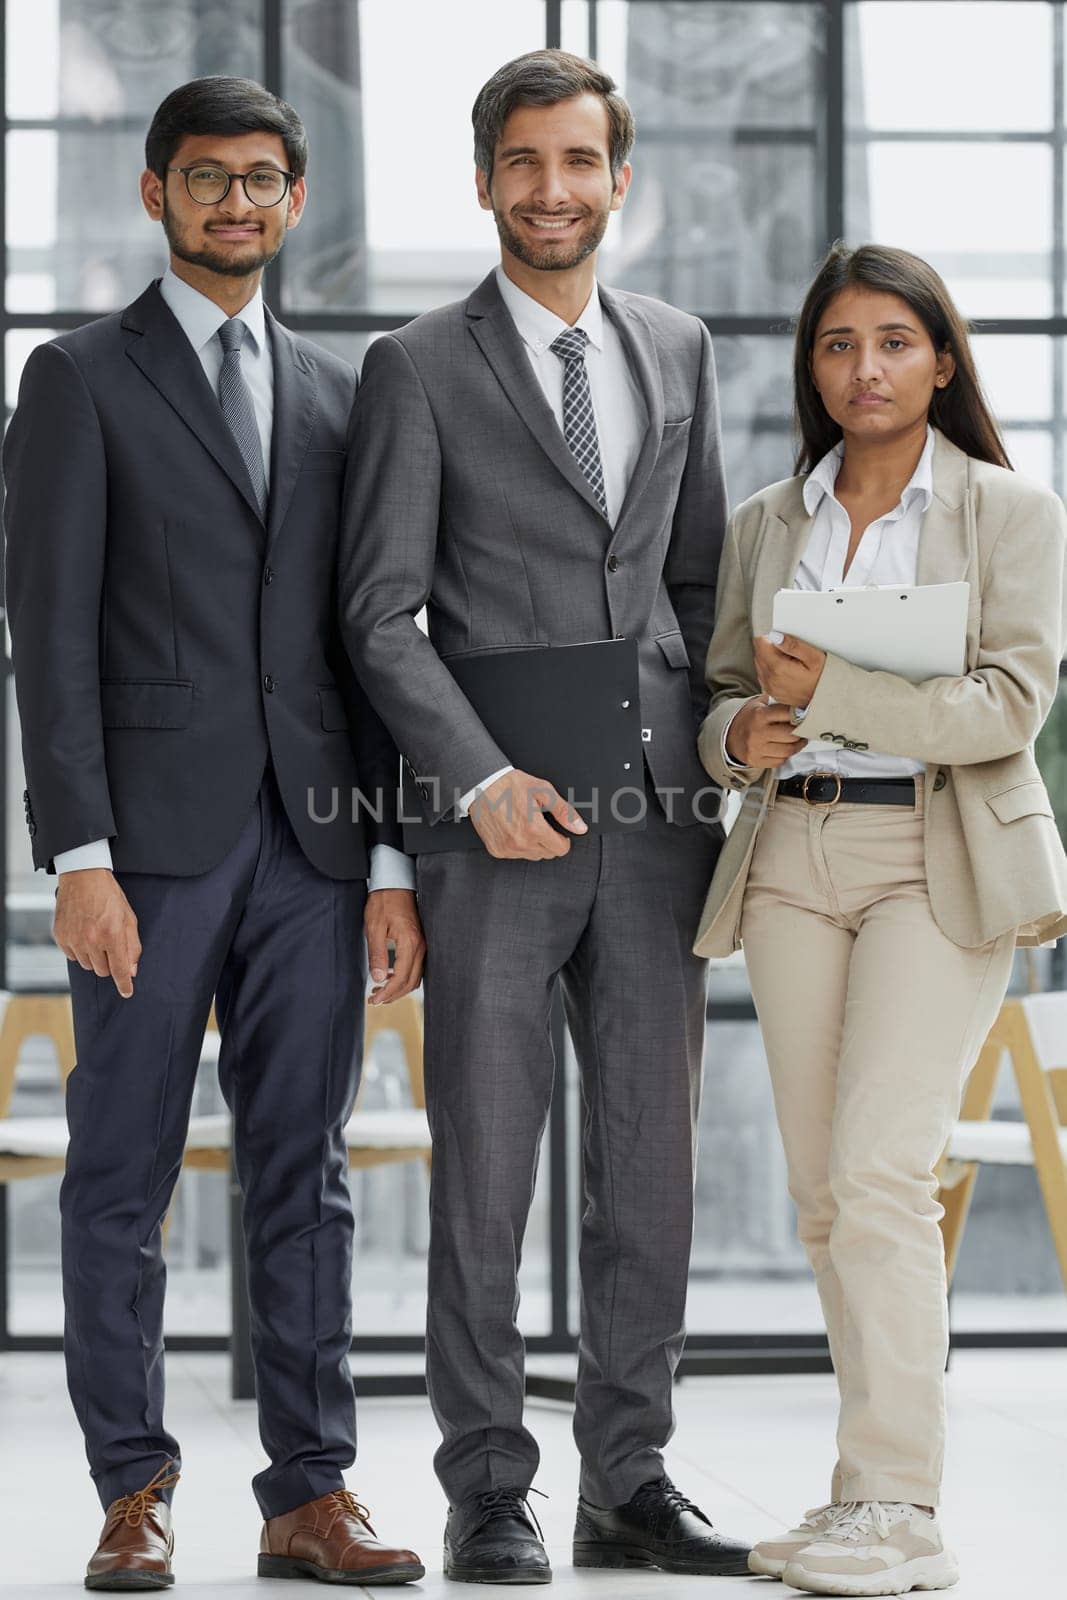 business people standing and looking straight ahead in a modern office